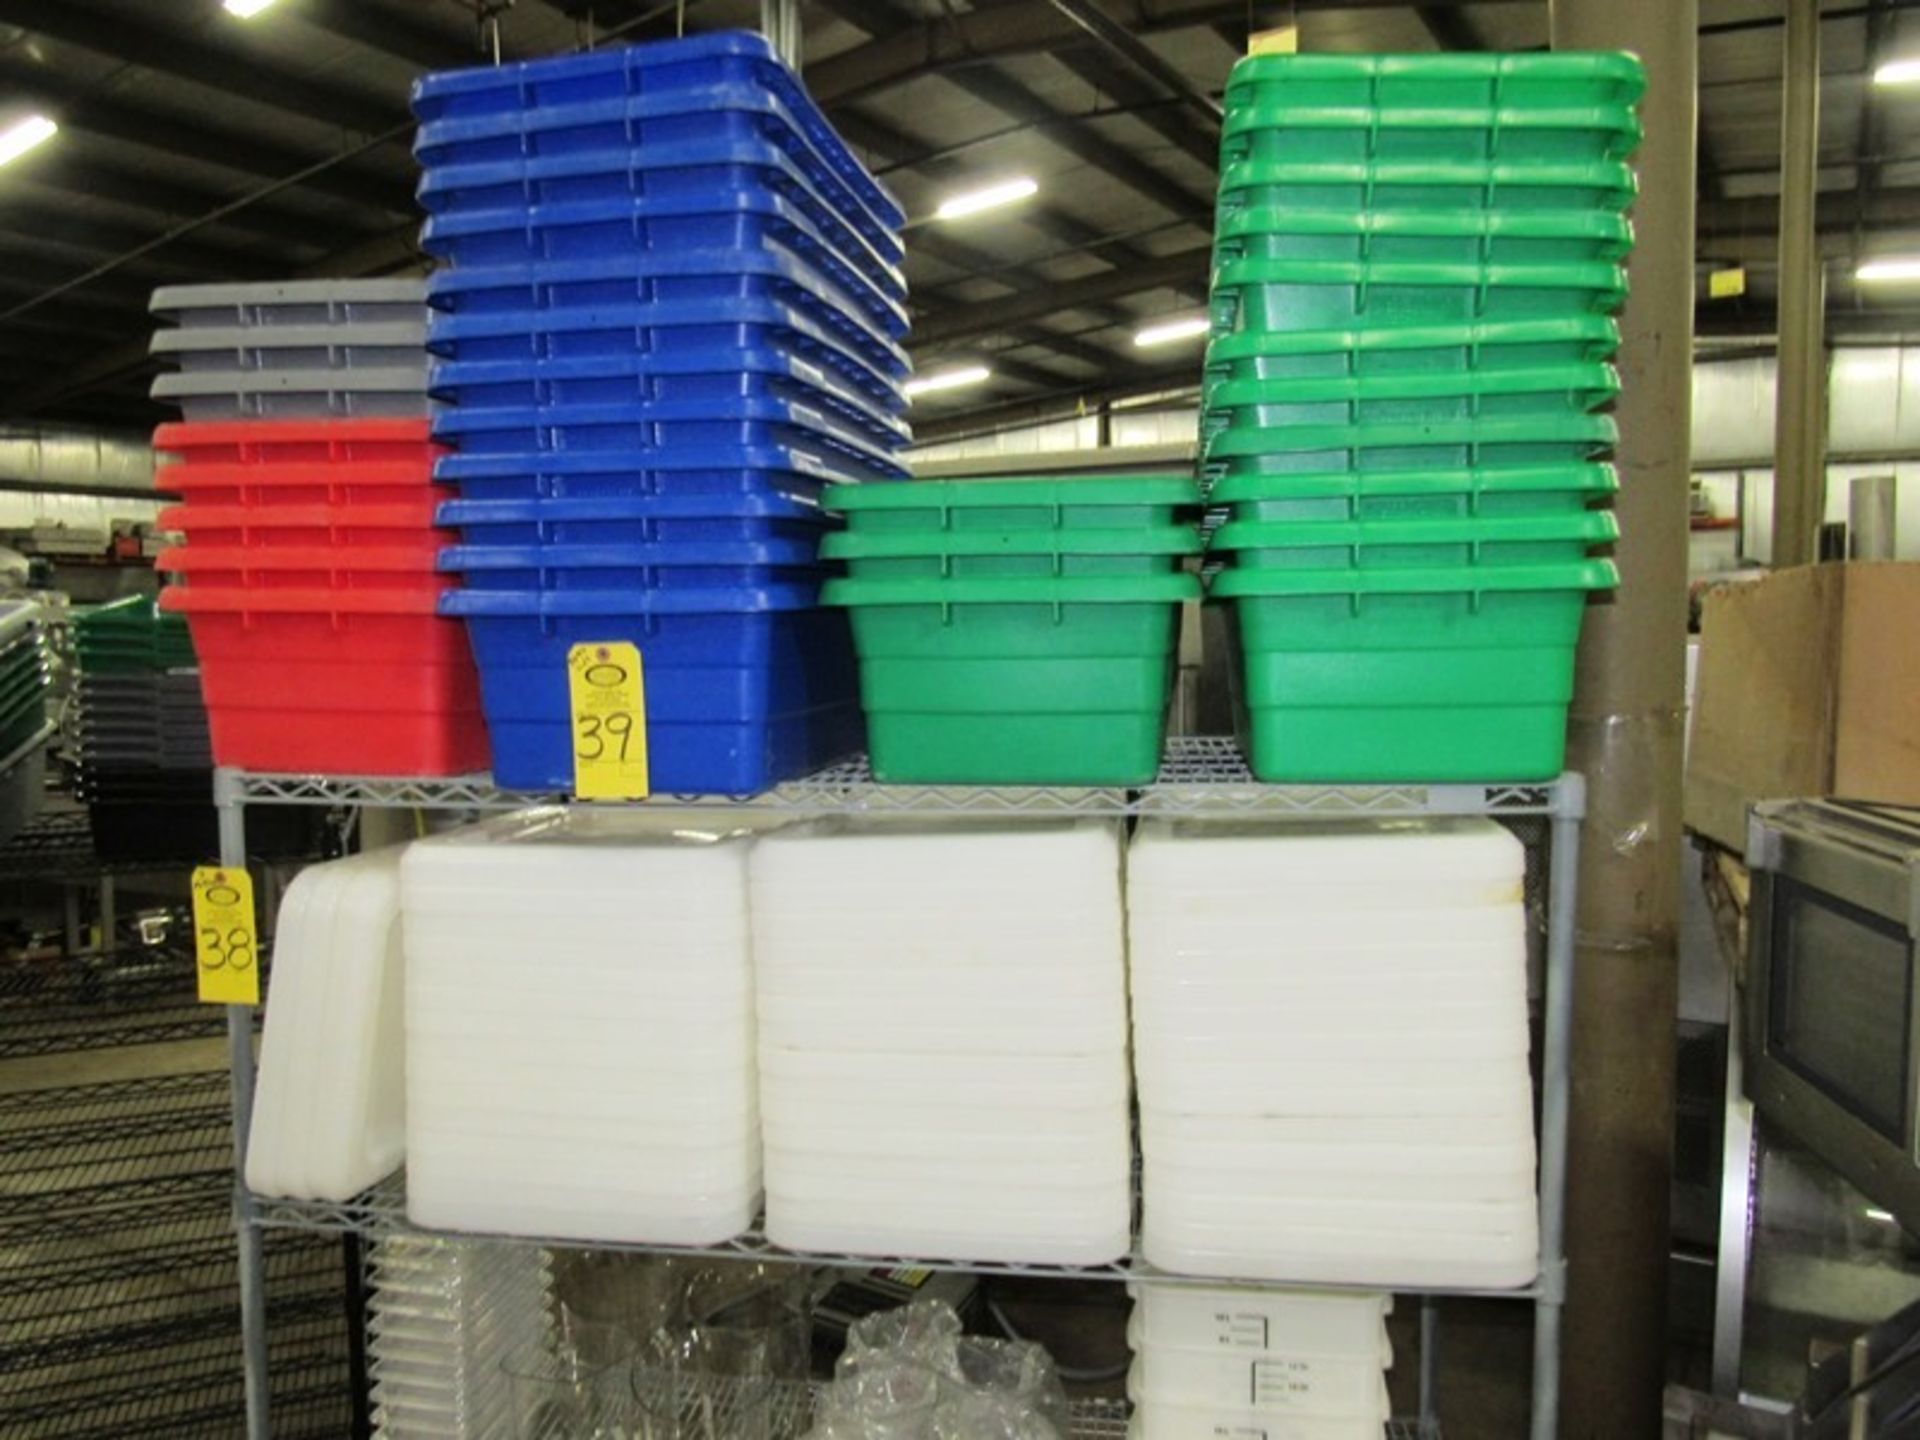 Lot of Green/Blue/Red Plastic Totes, (34) 12" W X 24" L X 8" D, with (48) Lids, (4) Totes & (7) Lids